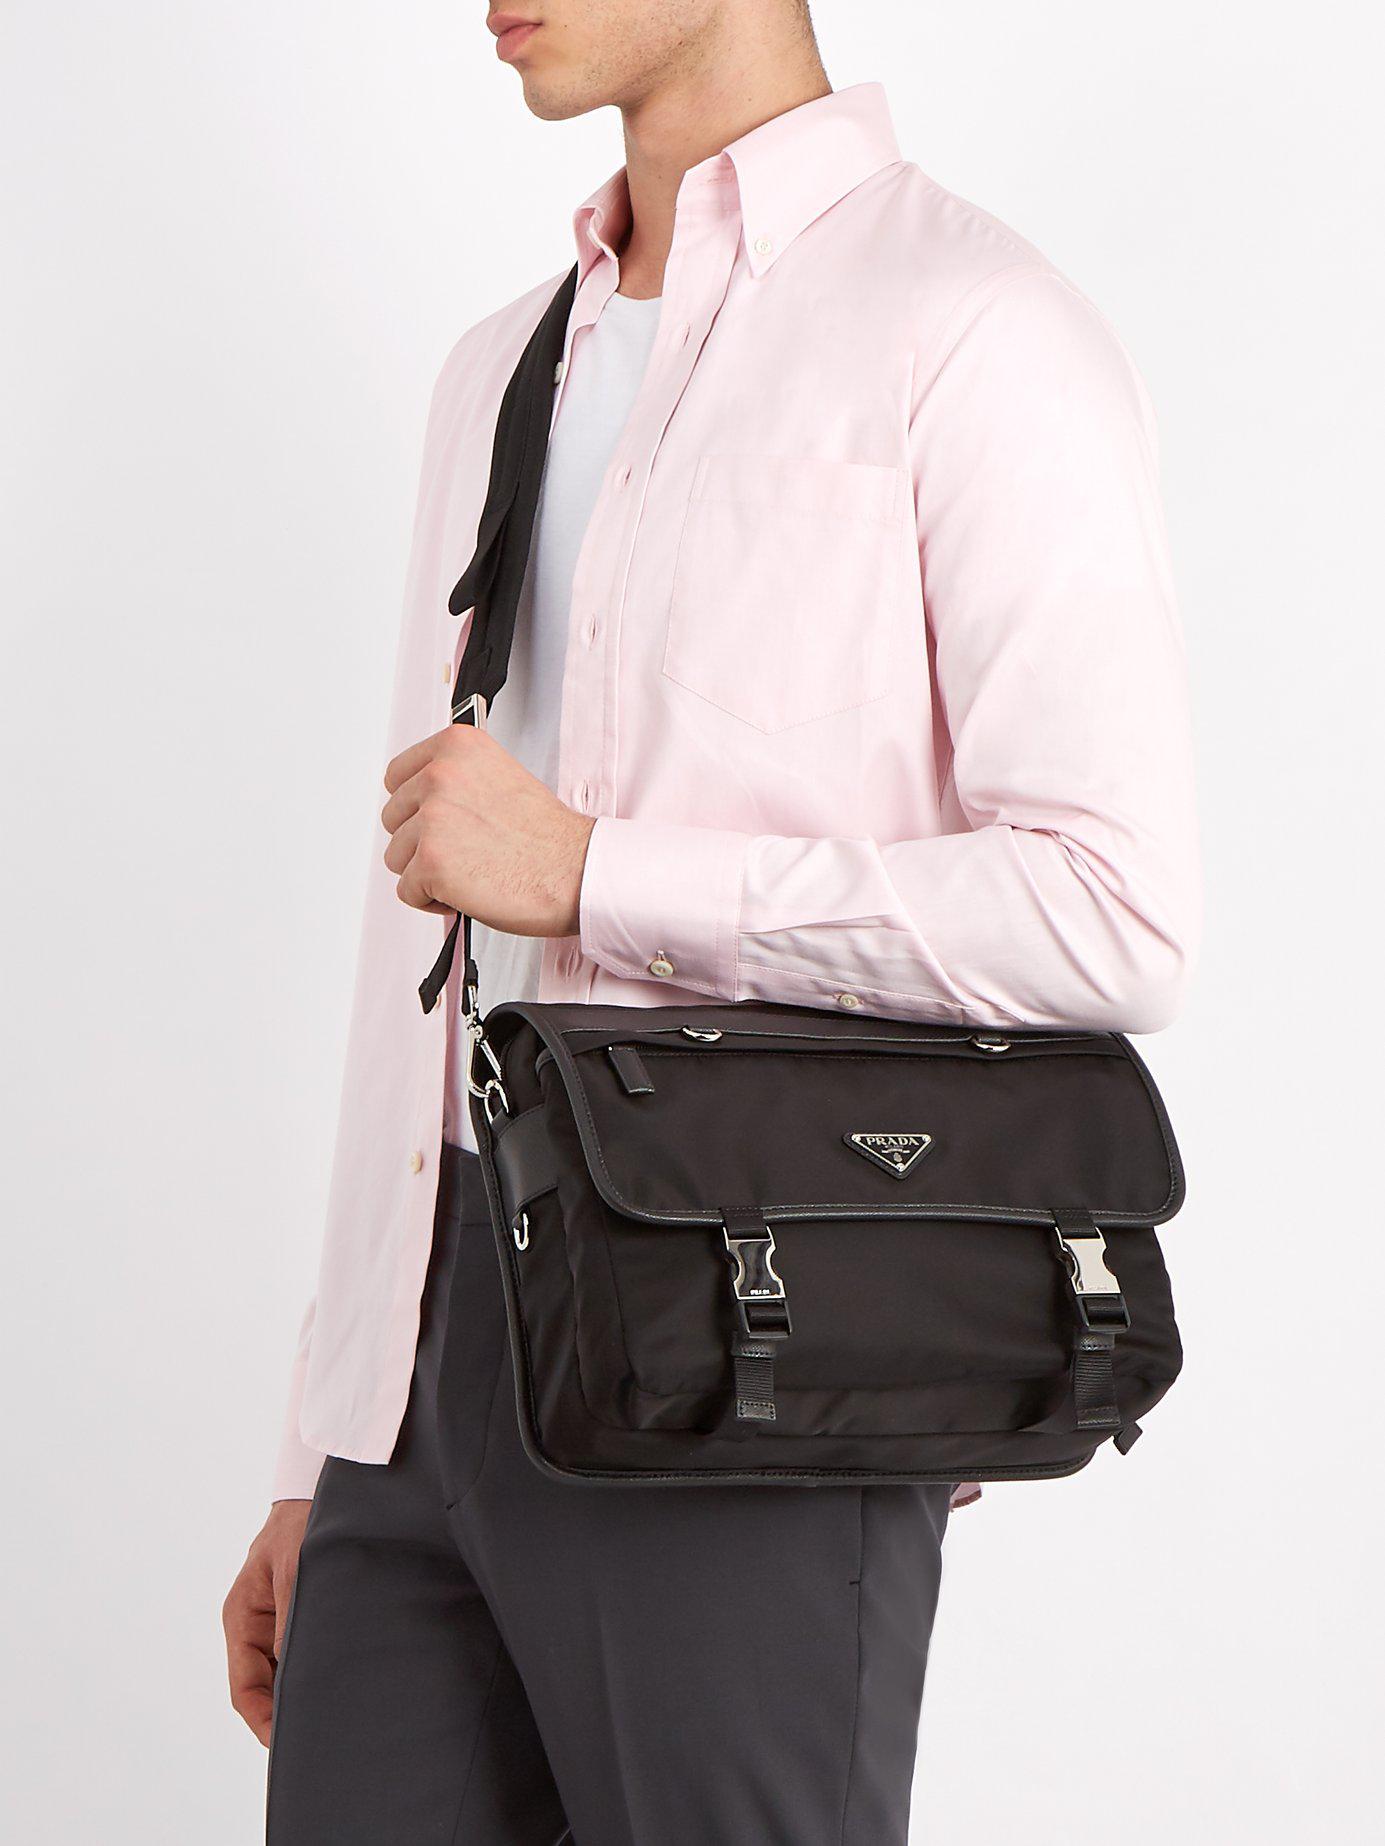 Prada Synthetic Leather-trimmed Nylon Messenger Bag in ...